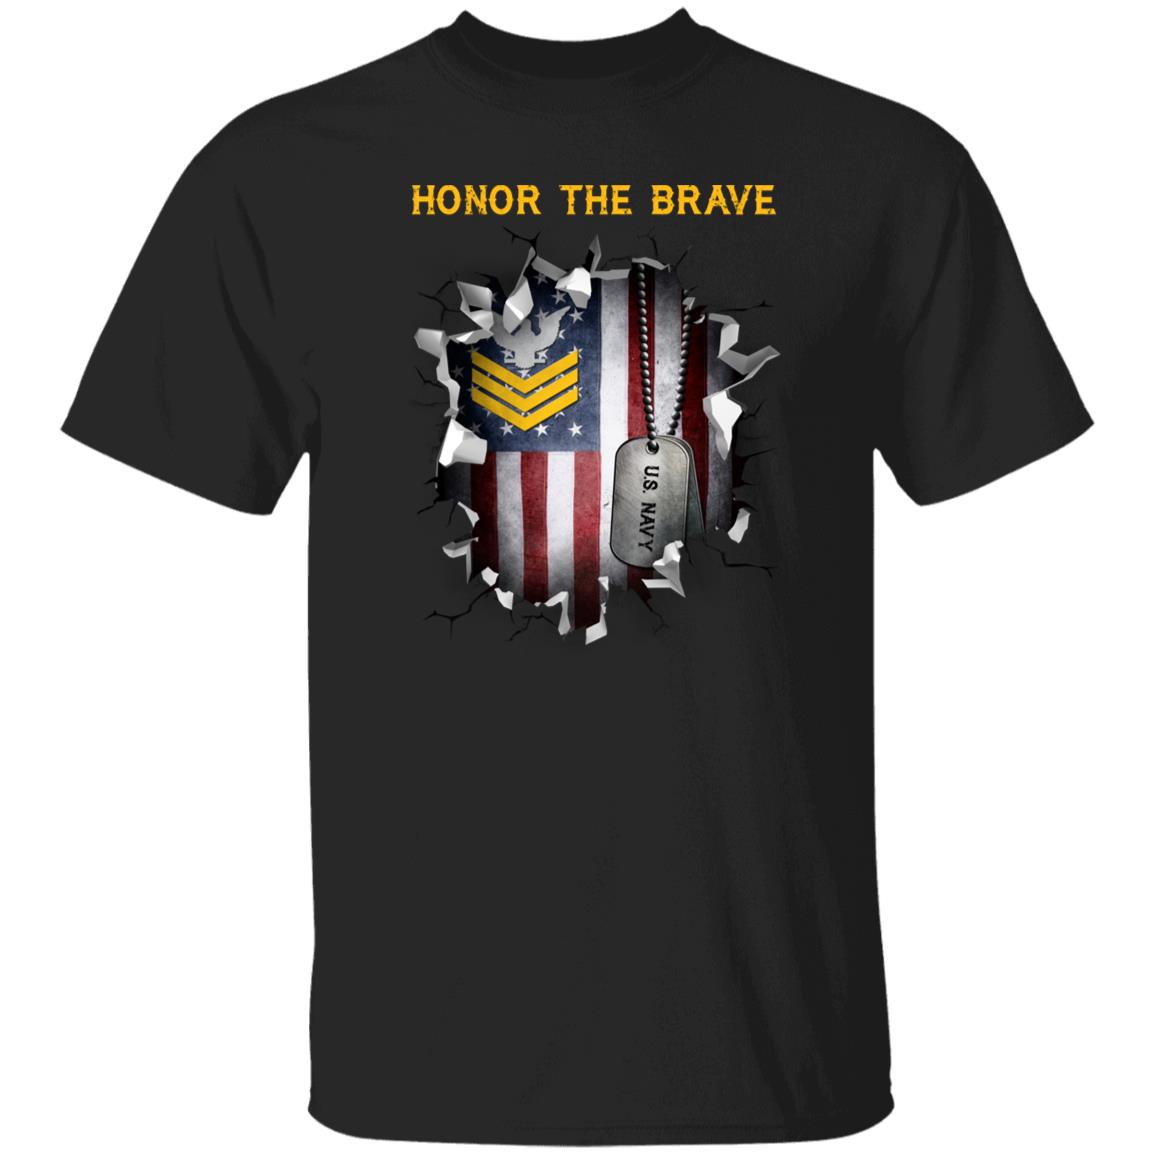 US Navy E-6 Petty Officer First Class E6 PO1 Gold Stripe Collar Device - Honor The Brave Front Shirt